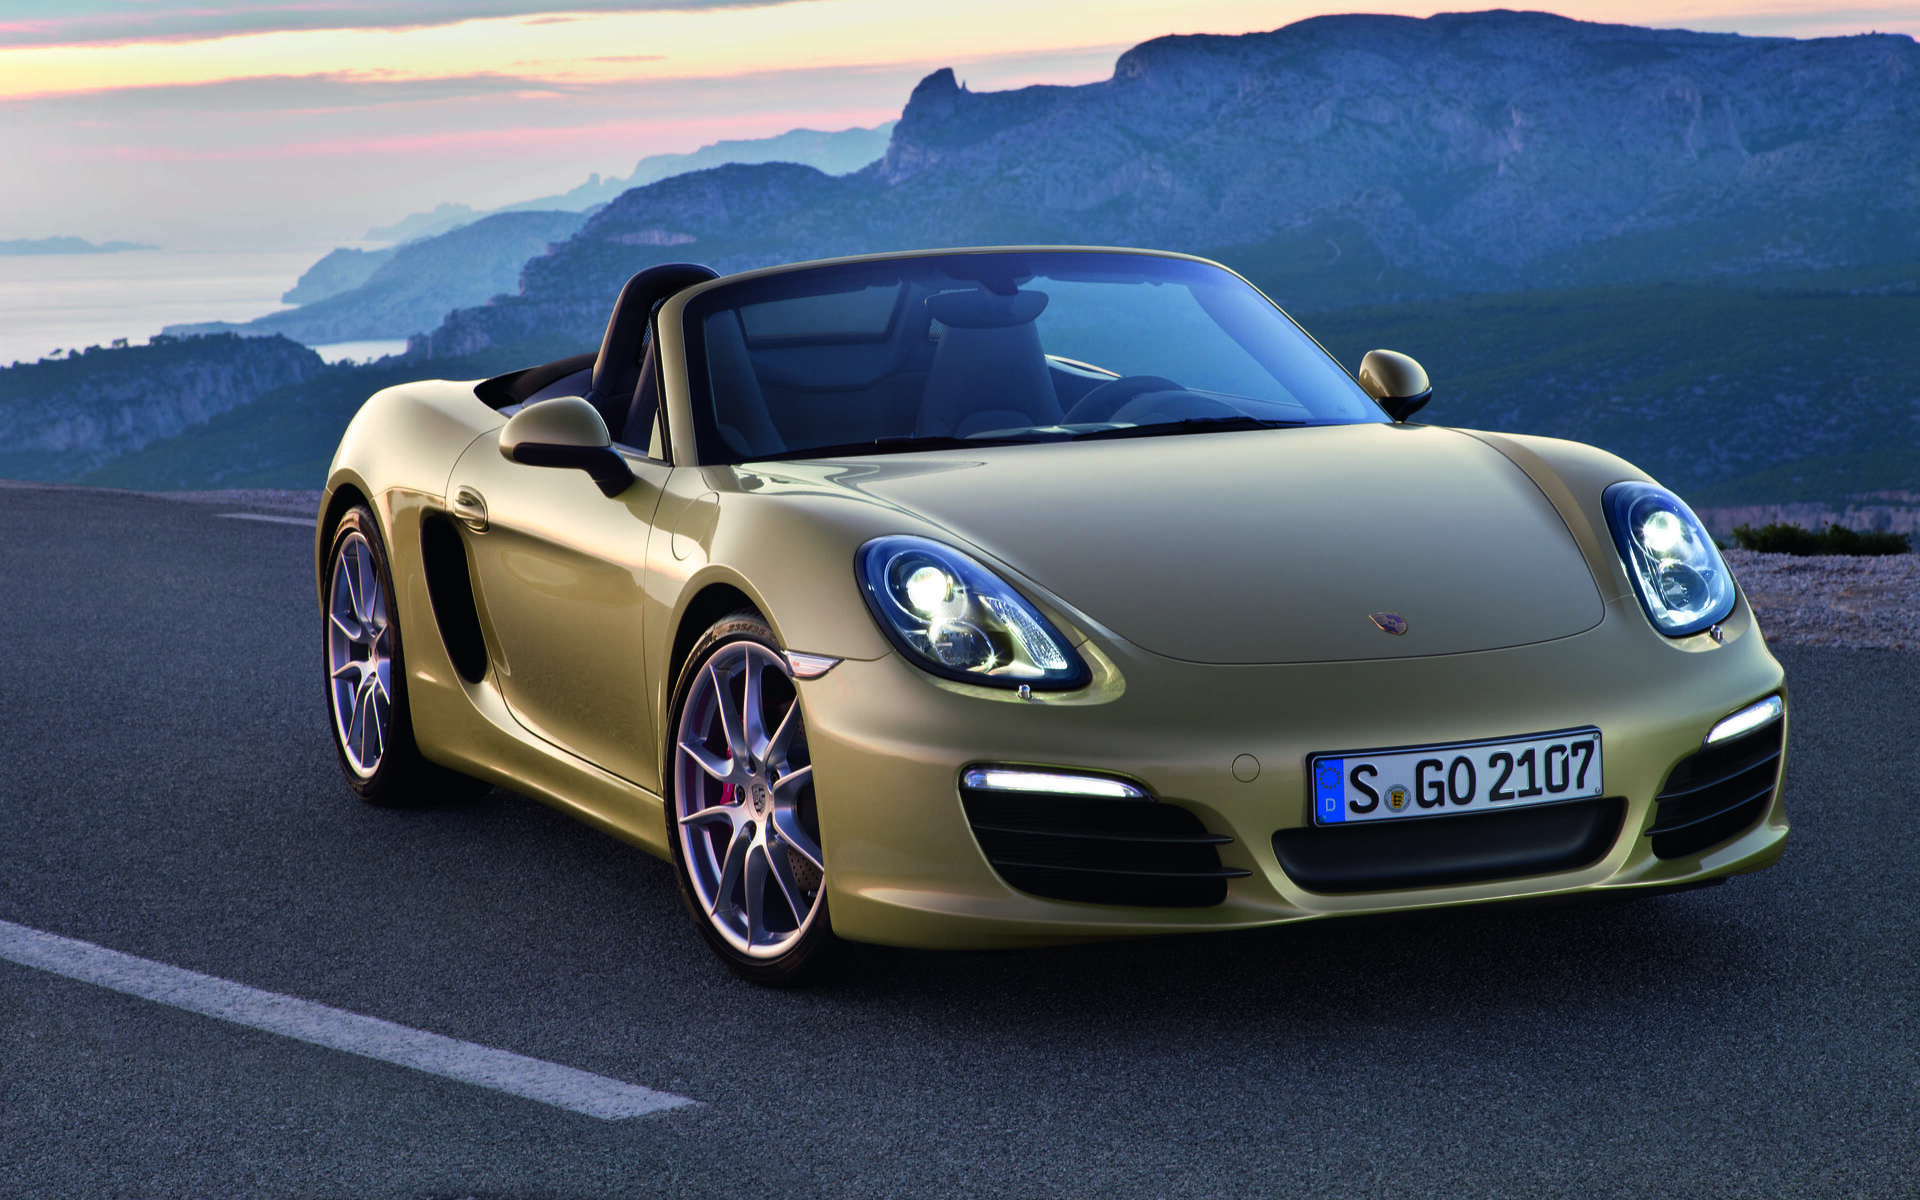 Pre-Owned Porsche Boxster: How Much Should You Pay? - The Car Guide